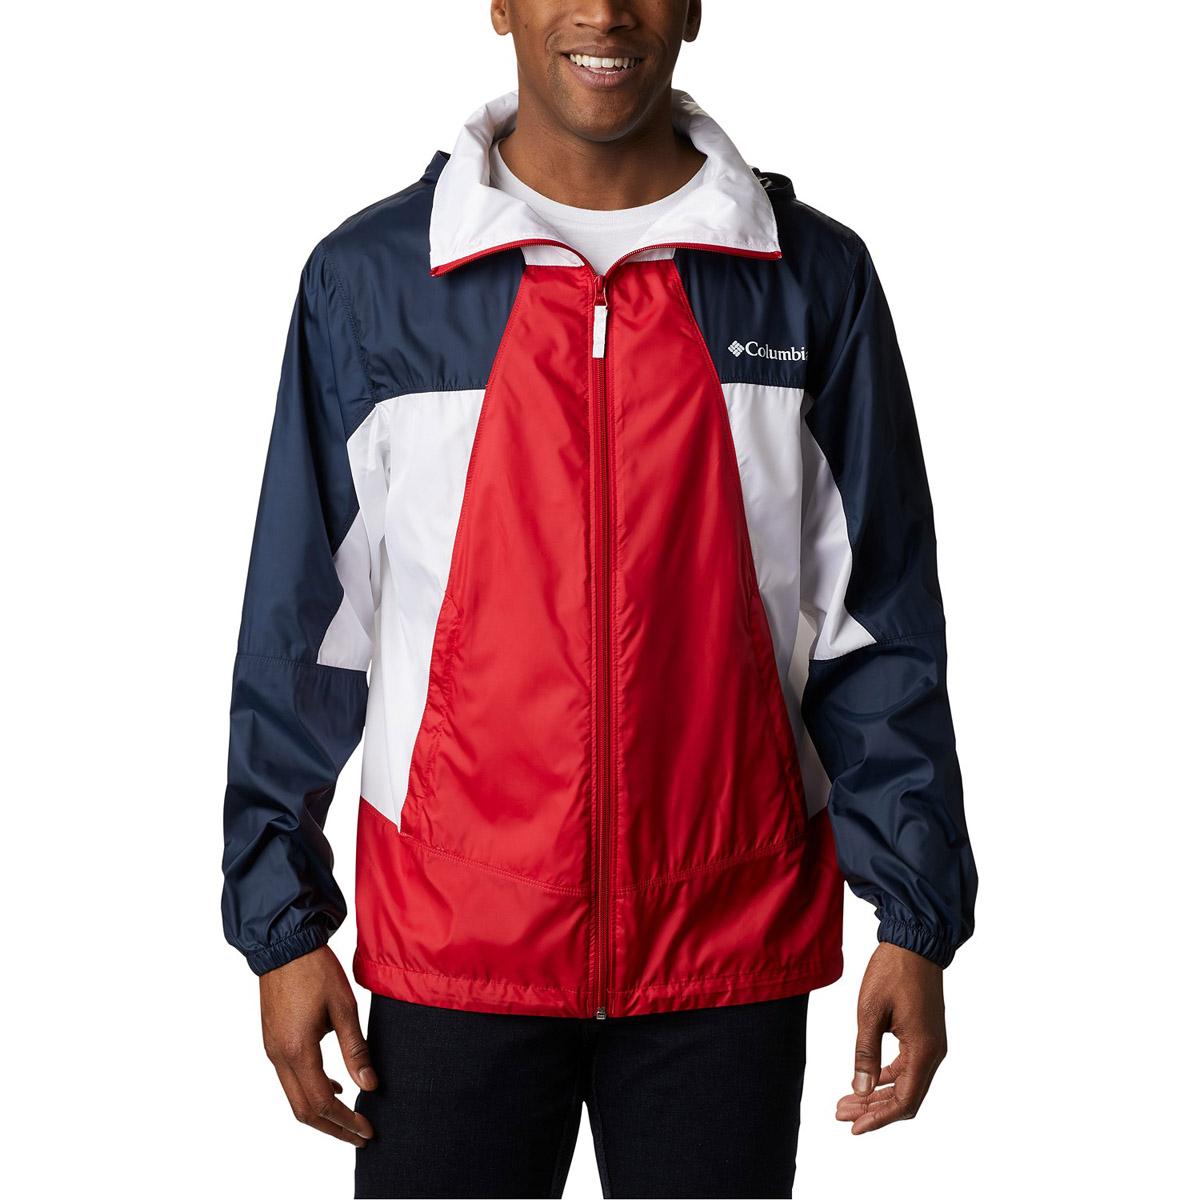 Columbia Mens Point Park Windbreaker for $22.50